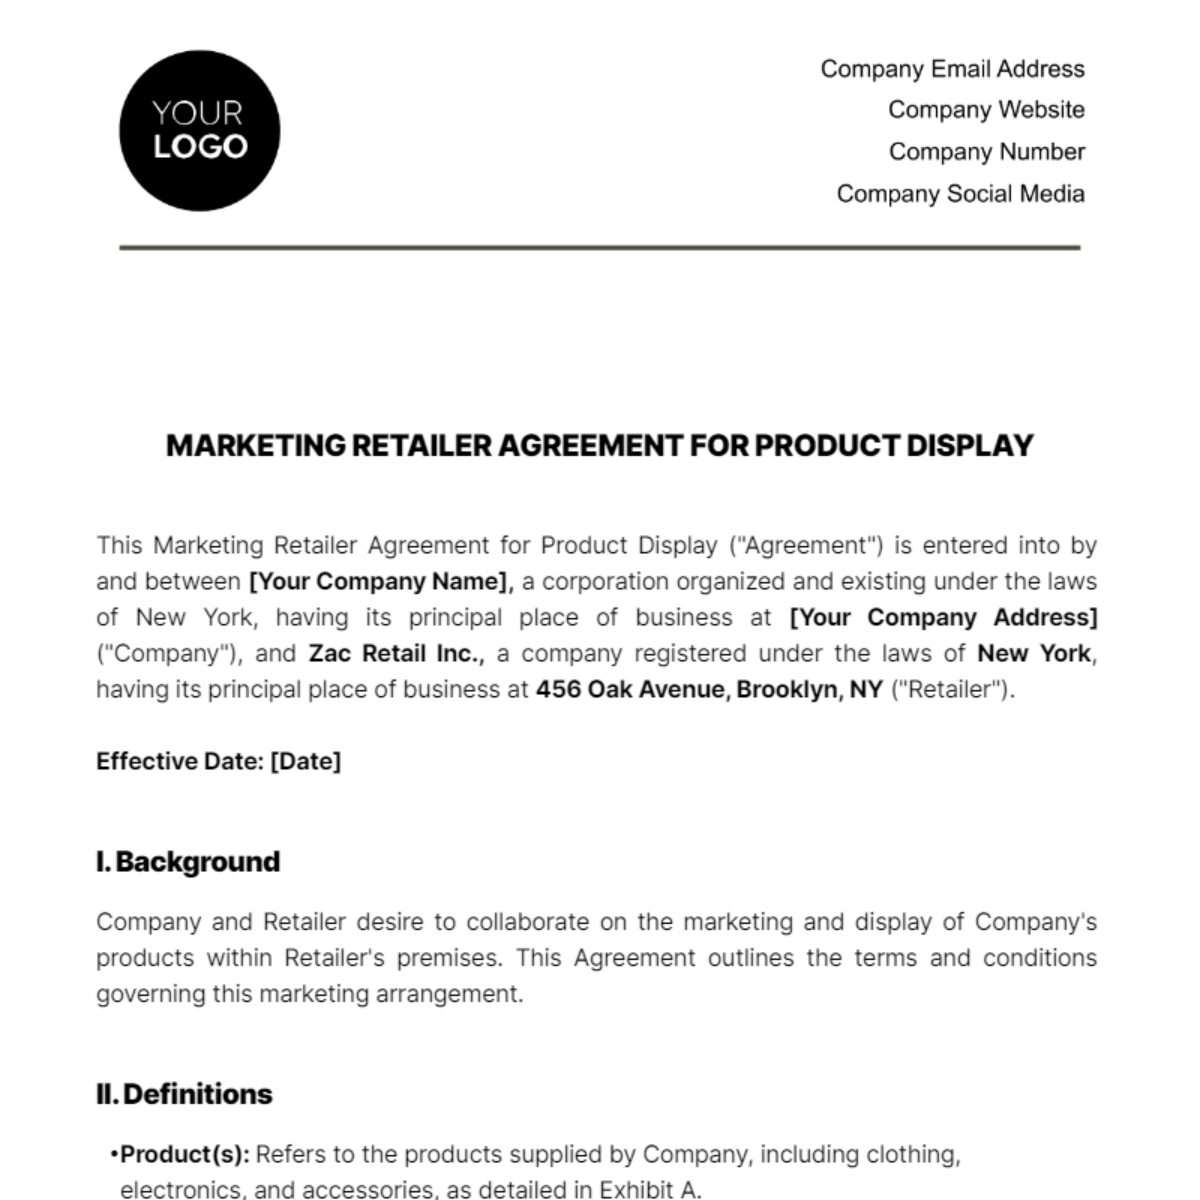 Marketing Retailer Agreement for Product Display Template